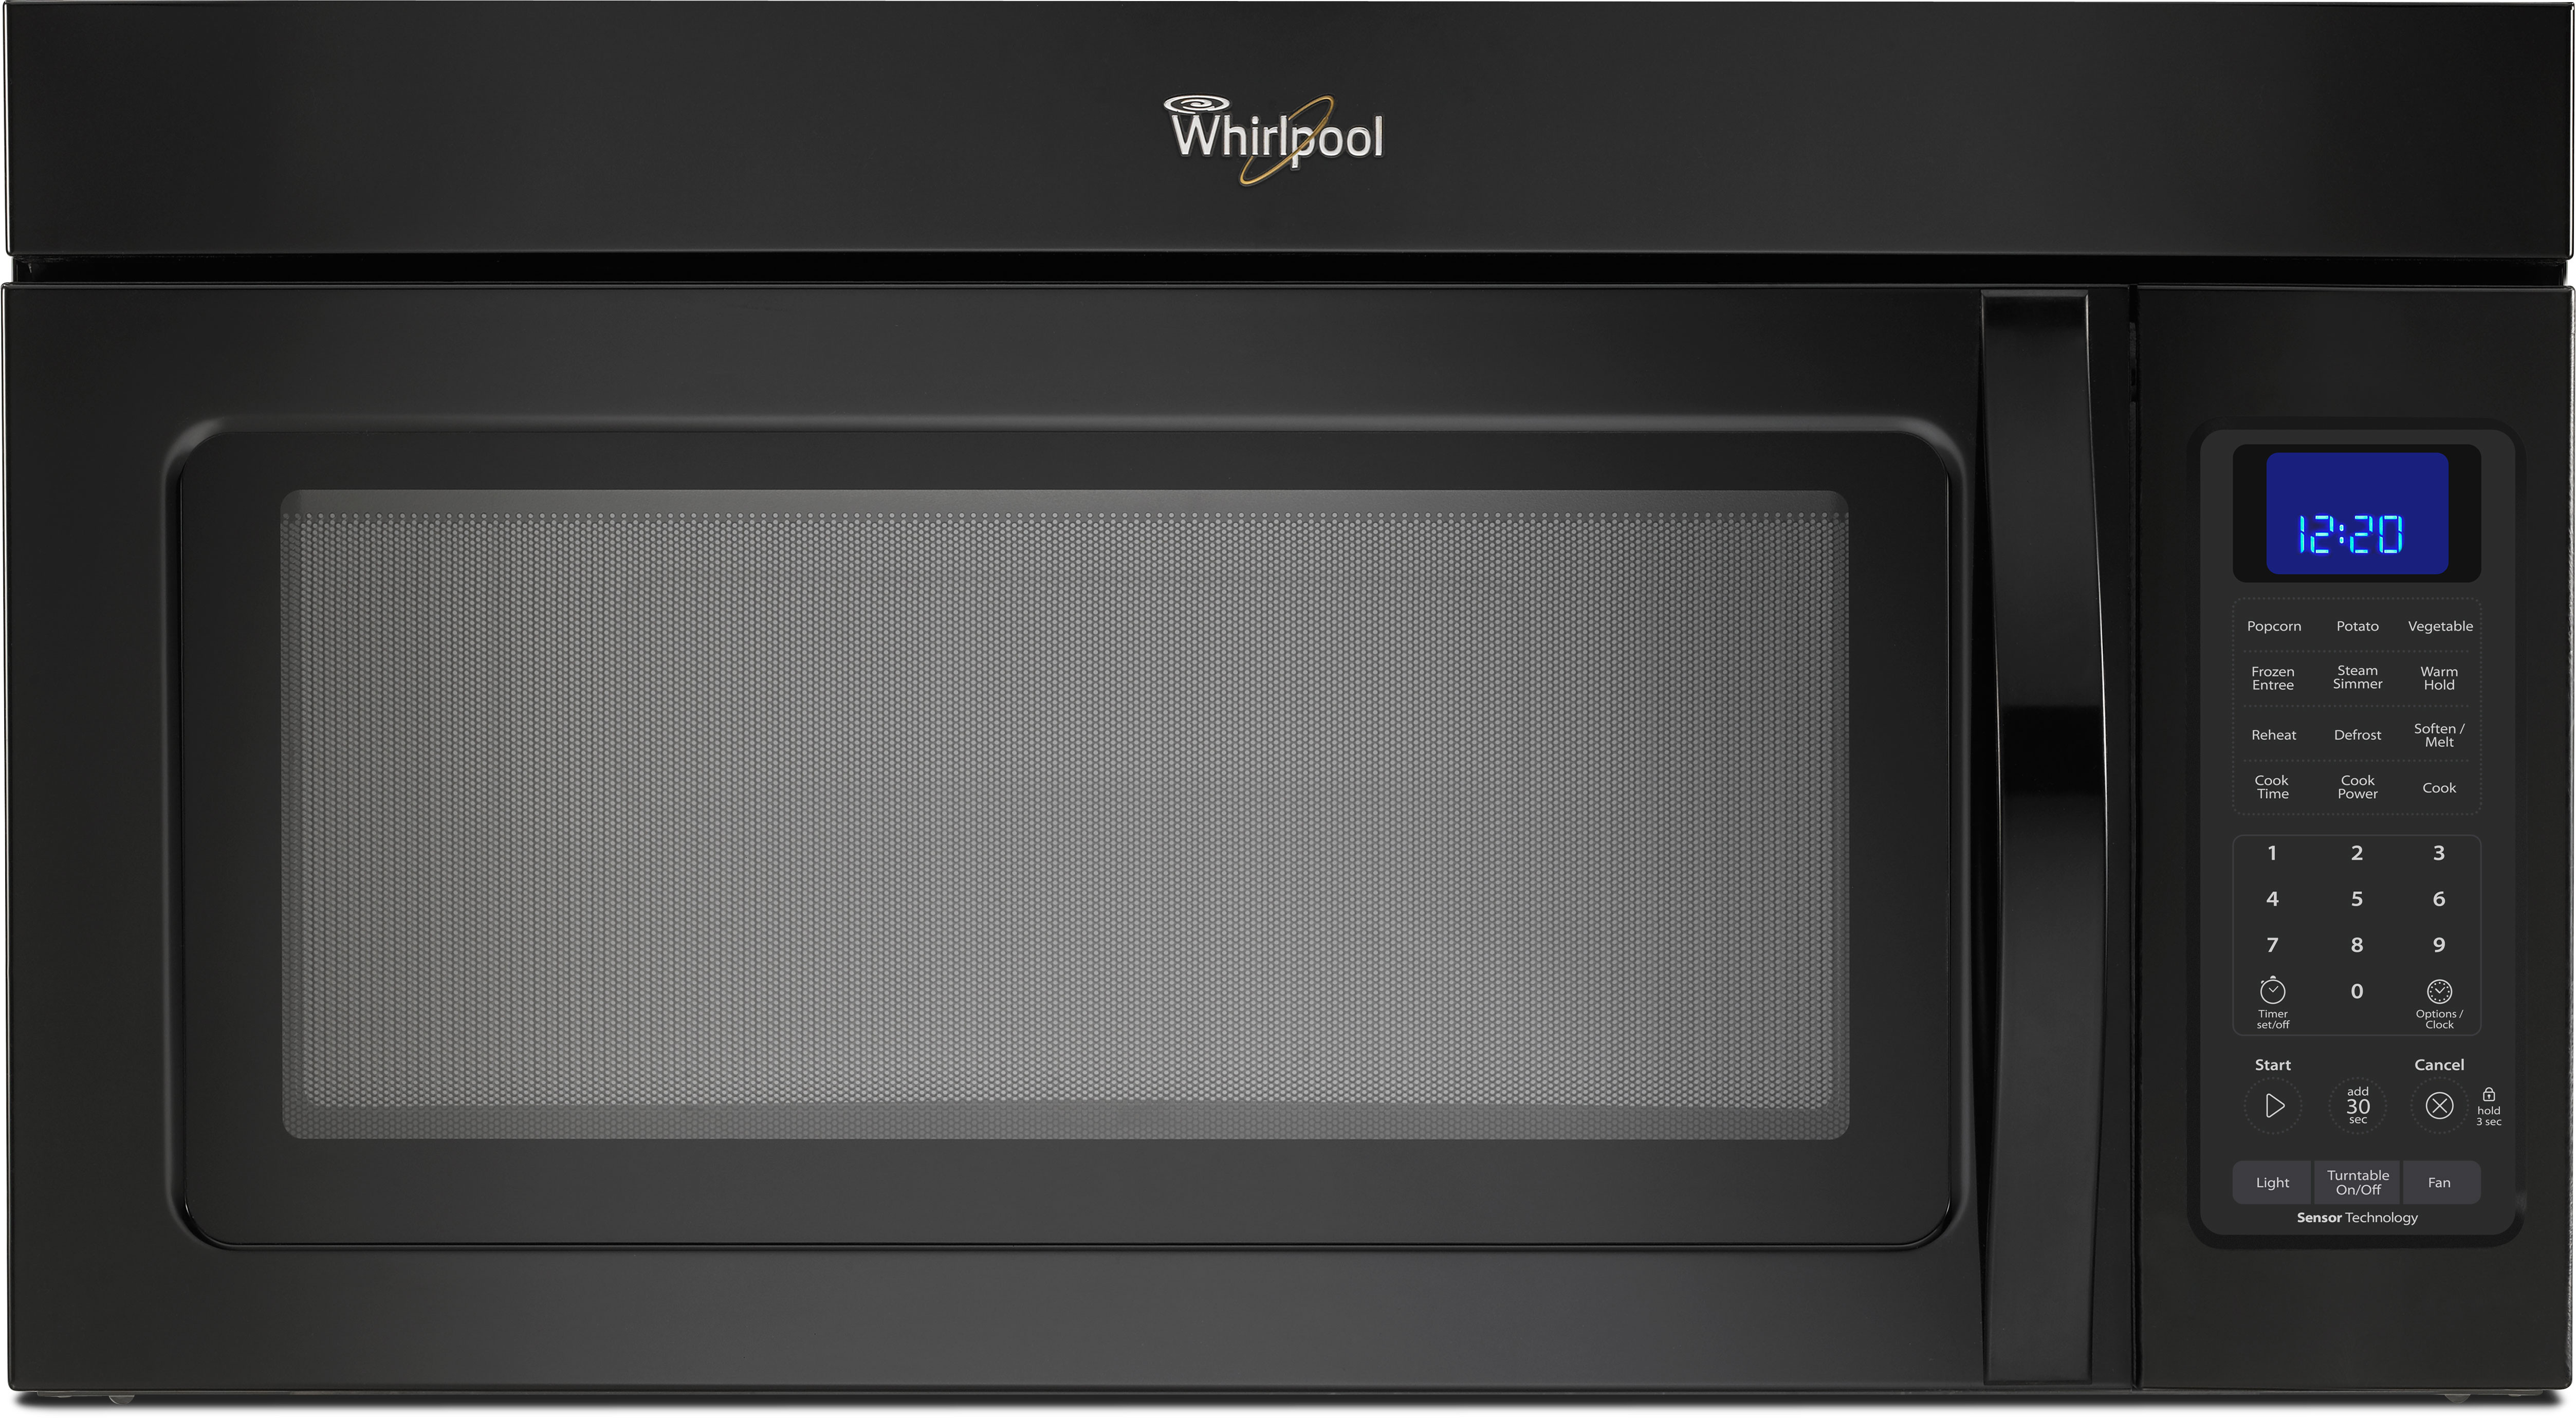 Whirlpool WMH32519CB 1.9 cu. ft. Over-the-Range Microwave Oven with